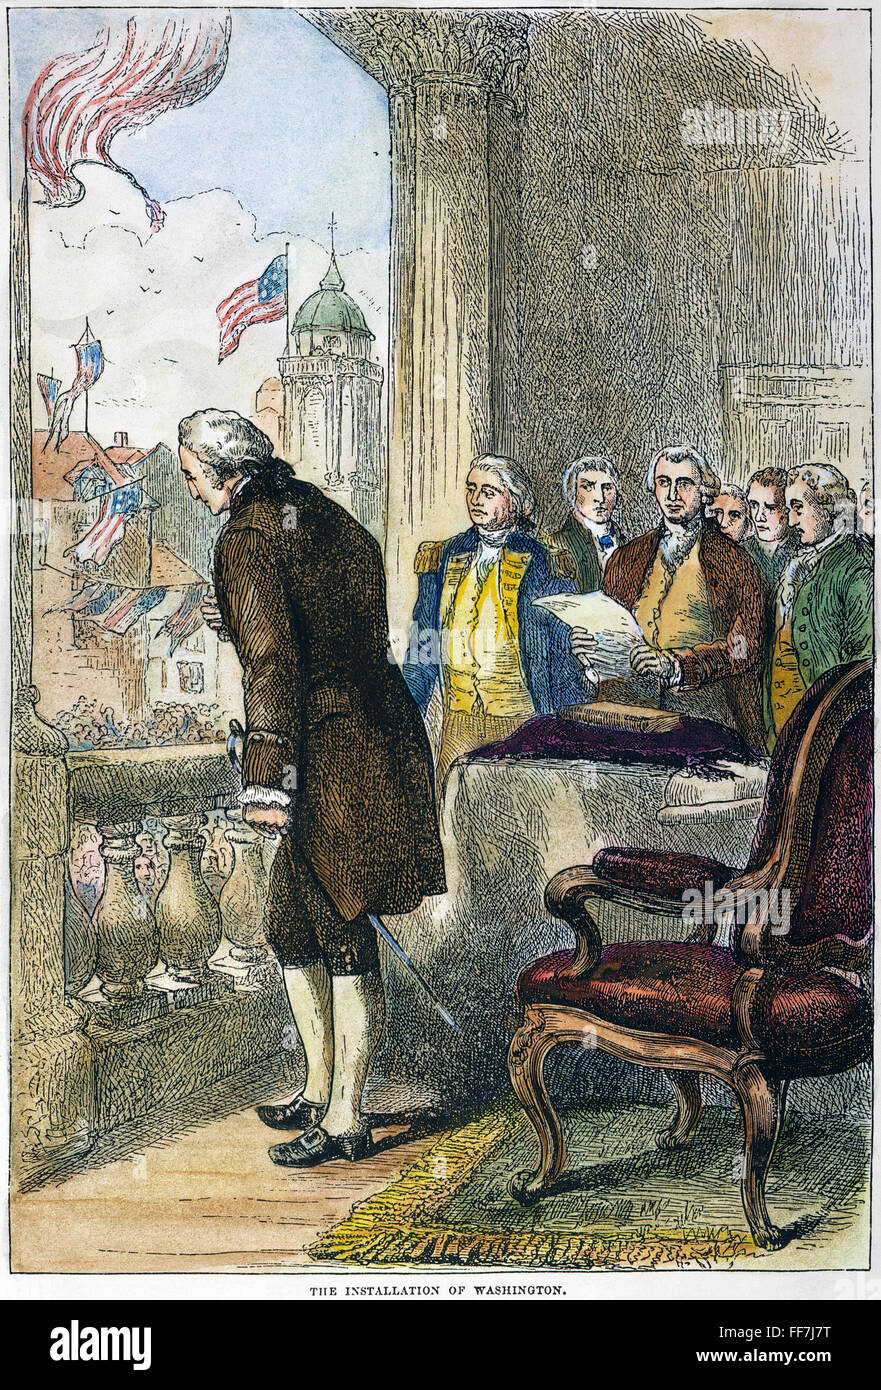 WASHINGTON: INAUGURATION. /nGeorge Washington bowing to the crowd outside Federal Hall in New York City after being sworn in as the first president of the United States, 30 April 1789. Wood engraving, 19th century. Stock Photo